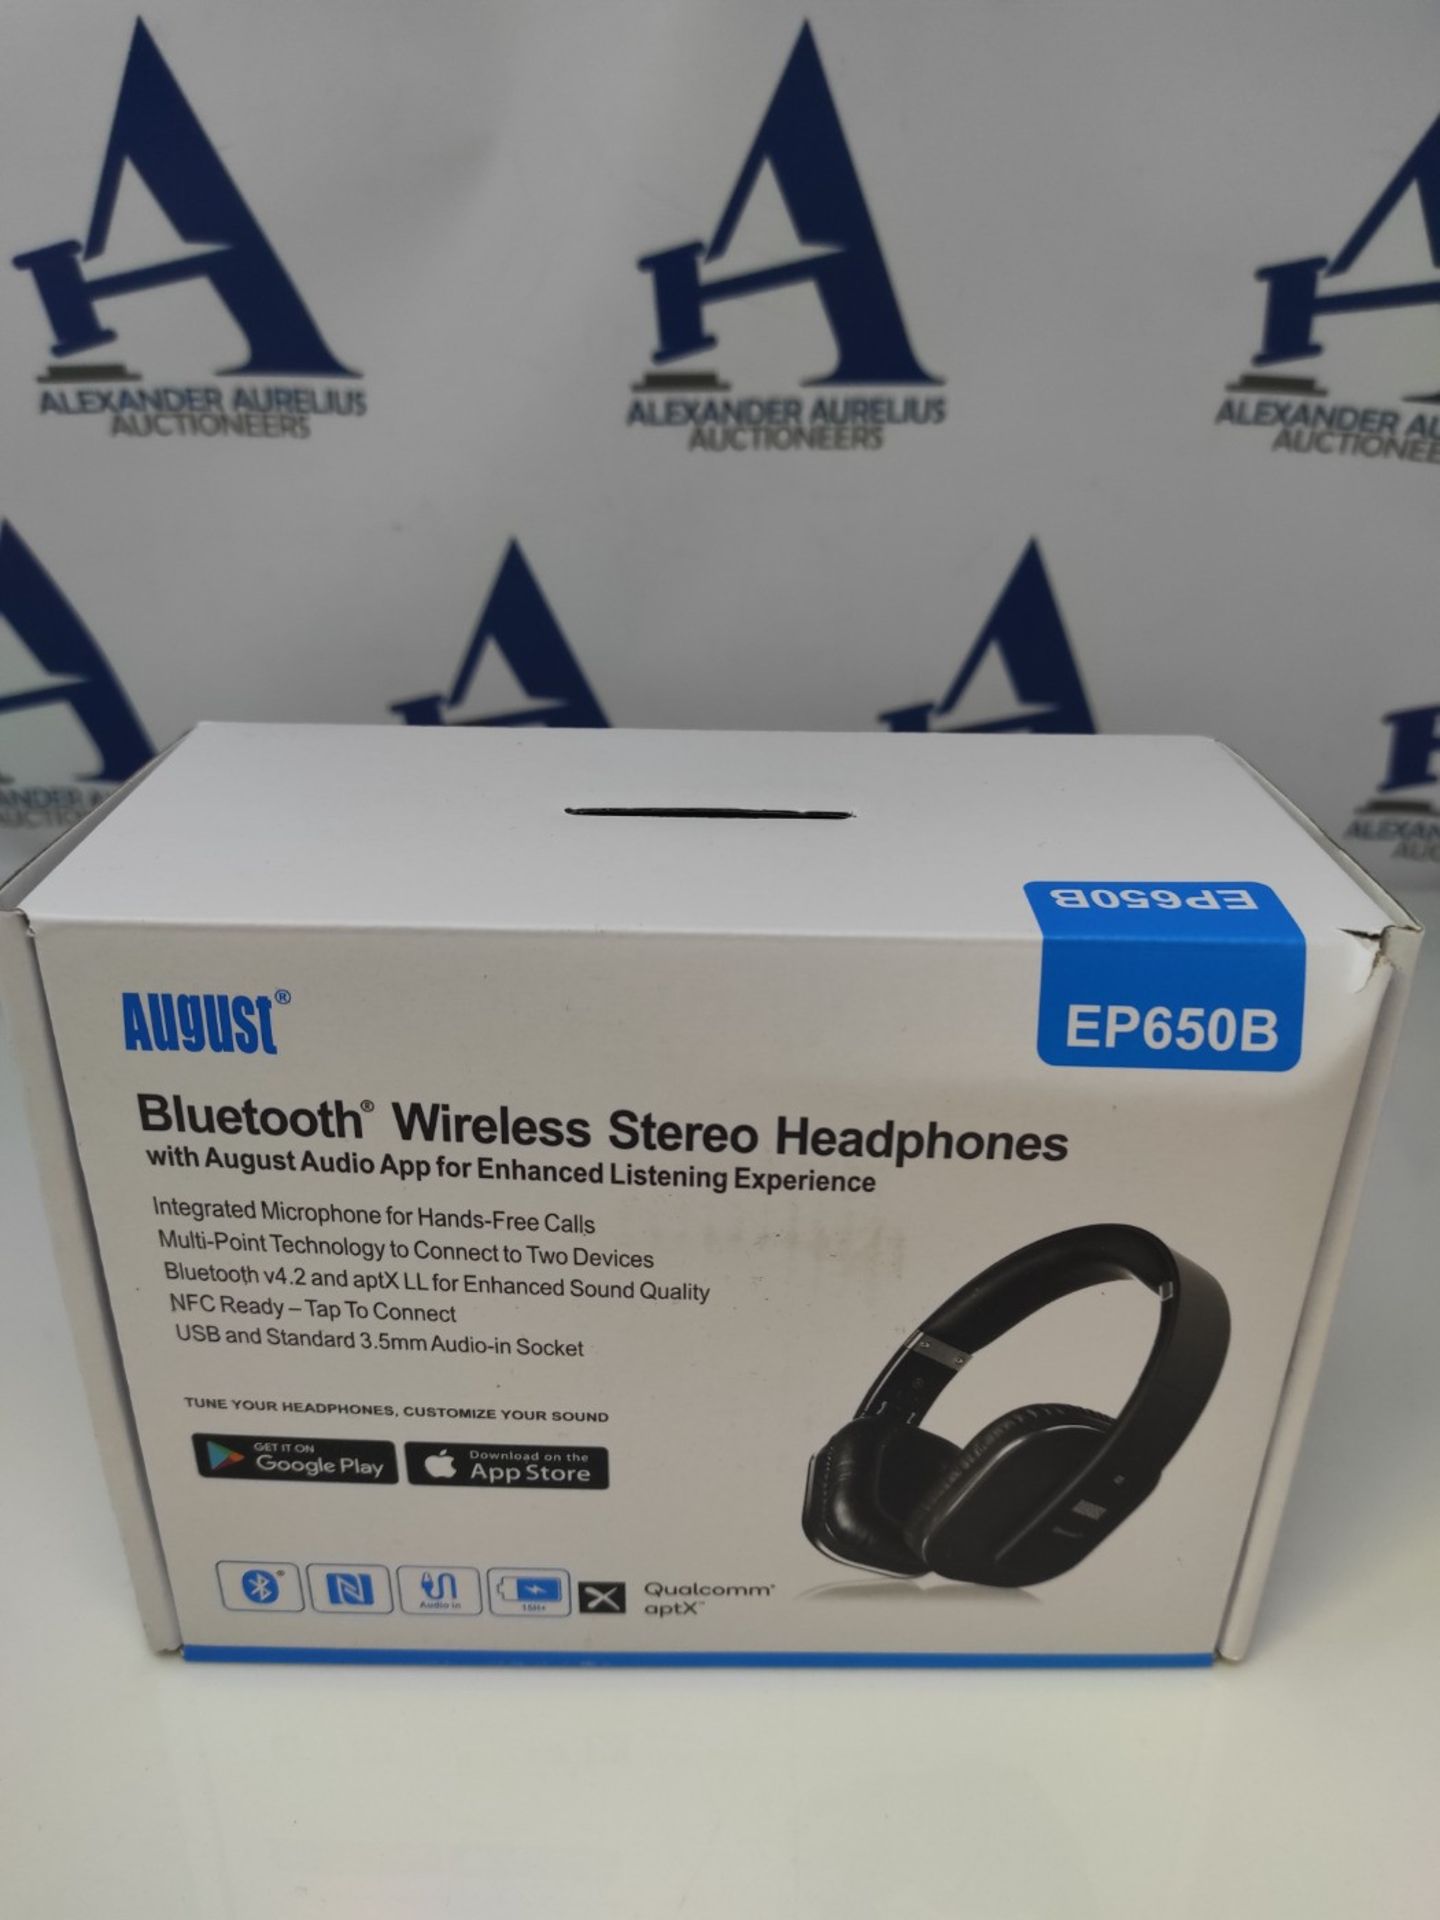 Wireless Bluetooth Headset 4.2 aptX Low Latency - August EP650 - Over Ear, Lightweight - Image 2 of 6